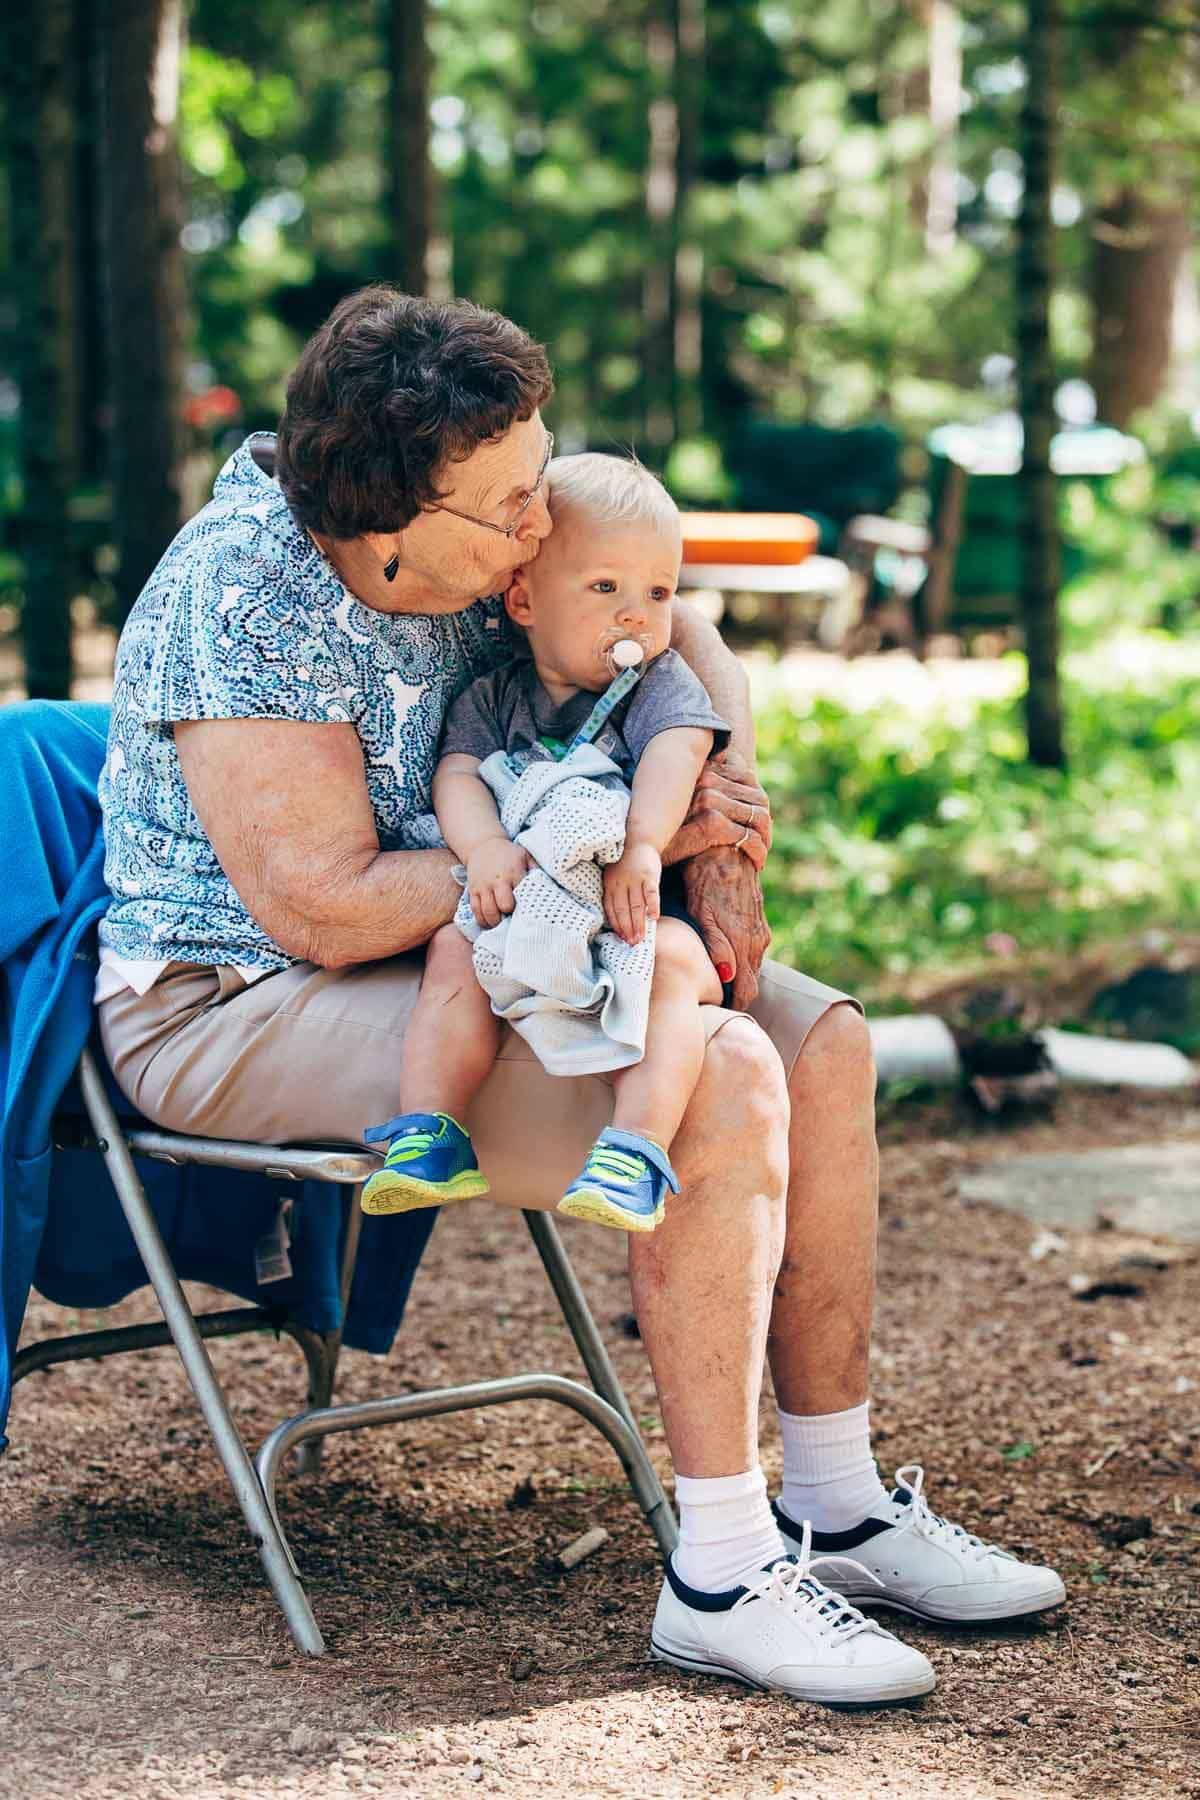 Elderly woman holding a toddler.